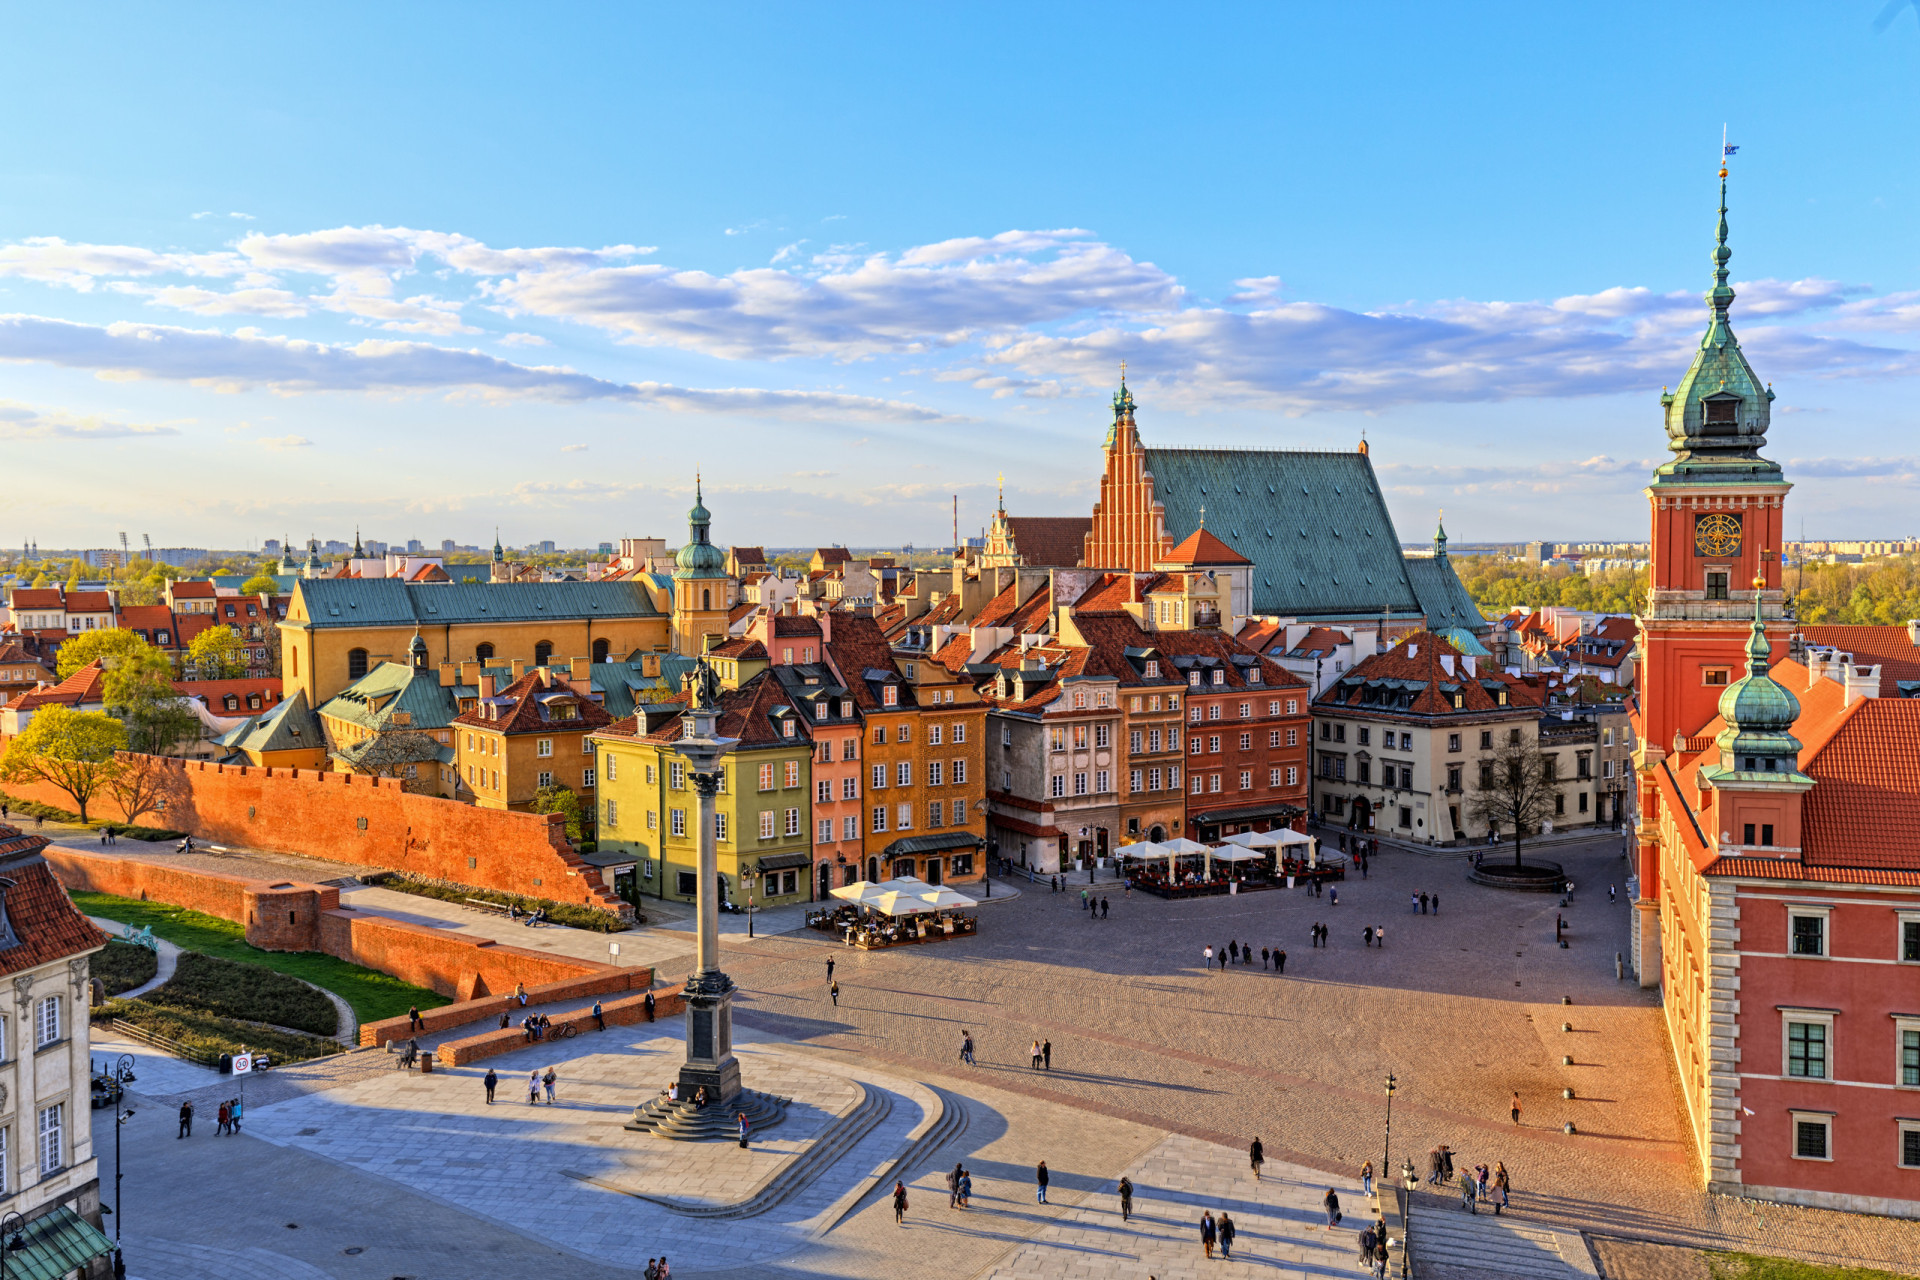 <p>Warsaw melds an attractive historical hub with a contemporary cityscape marked by steel and glass skyscrapers and Stalinist towers. The big news in 2024 is that the Museum of Modern Art in Warsaw will open in new premises as a feature of the city's funky arts district.</p><p>You may also like:<a href="https://www.starsinsider.com/n/350820?utm_source=msn.com&utm_medium=display&utm_campaign=referral_description&utm_content=636762en-en"> Ugly celebrity divorces that will make you cringe</a></p>